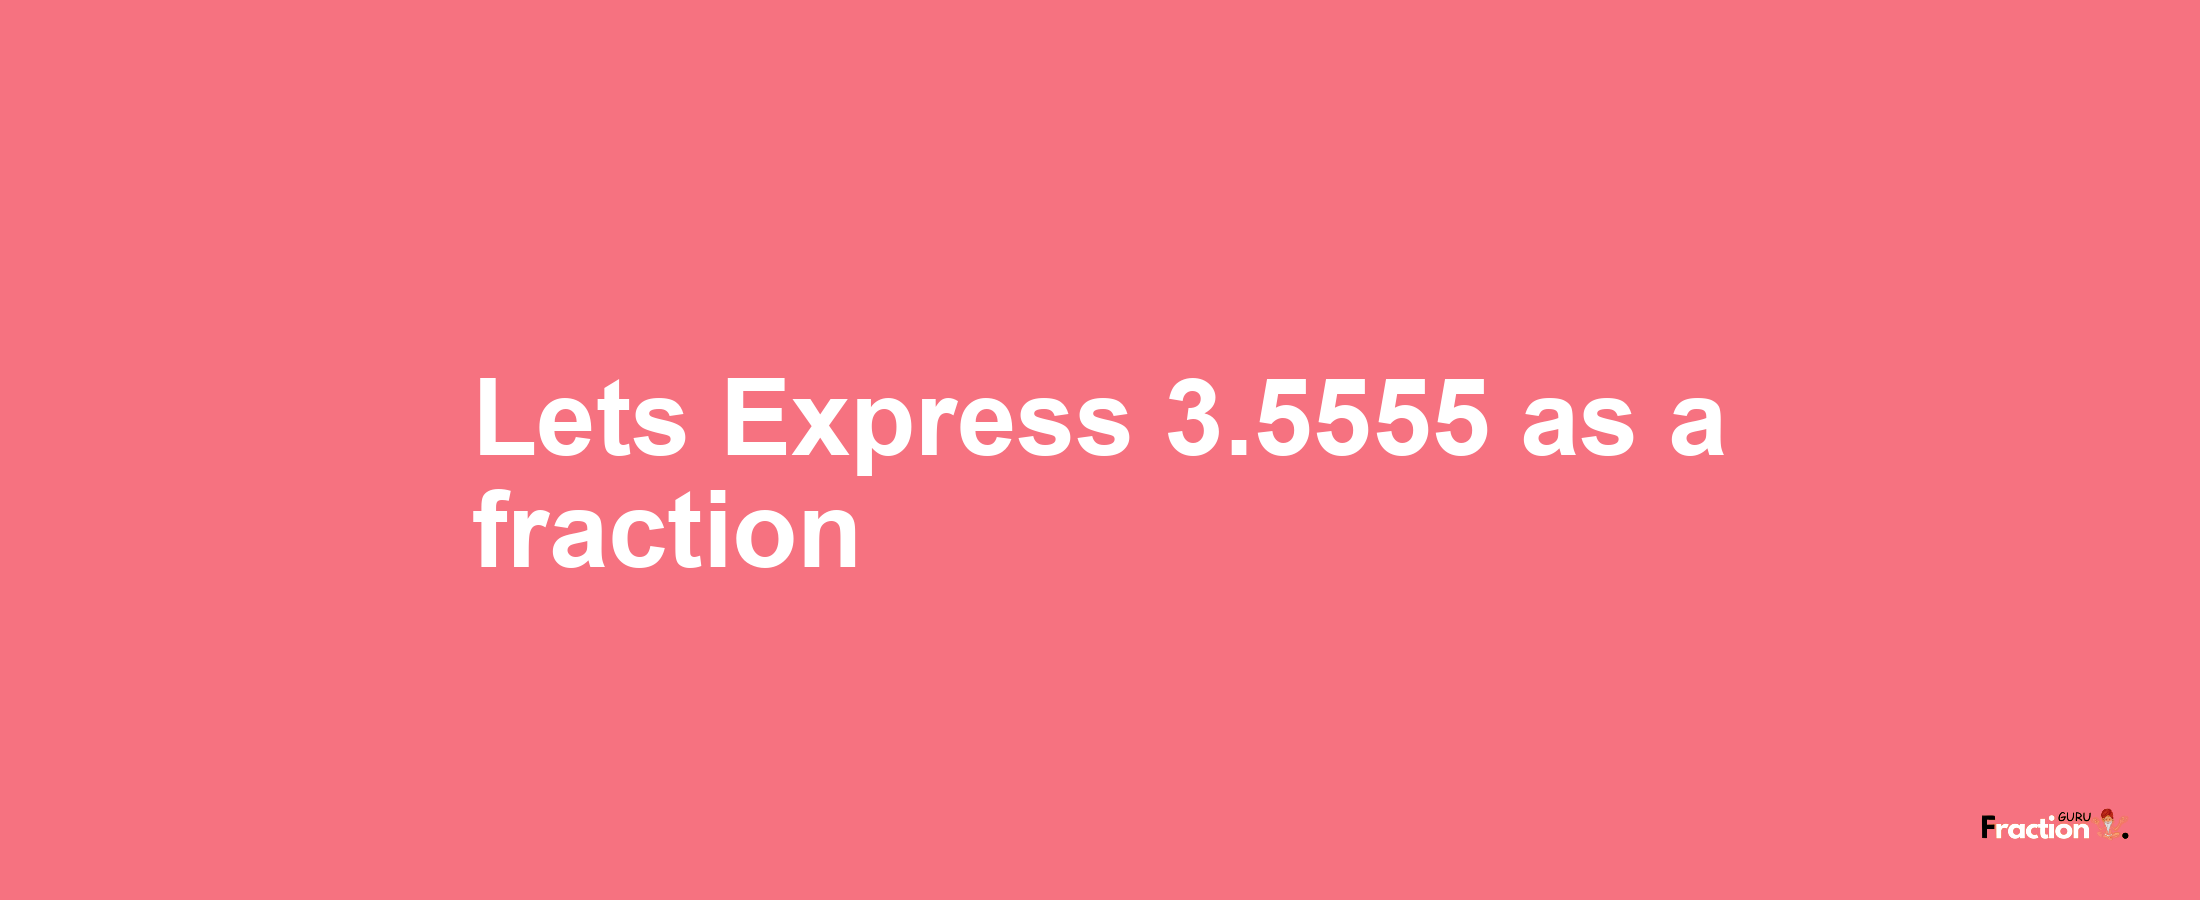 Lets Express 3.5555 as afraction